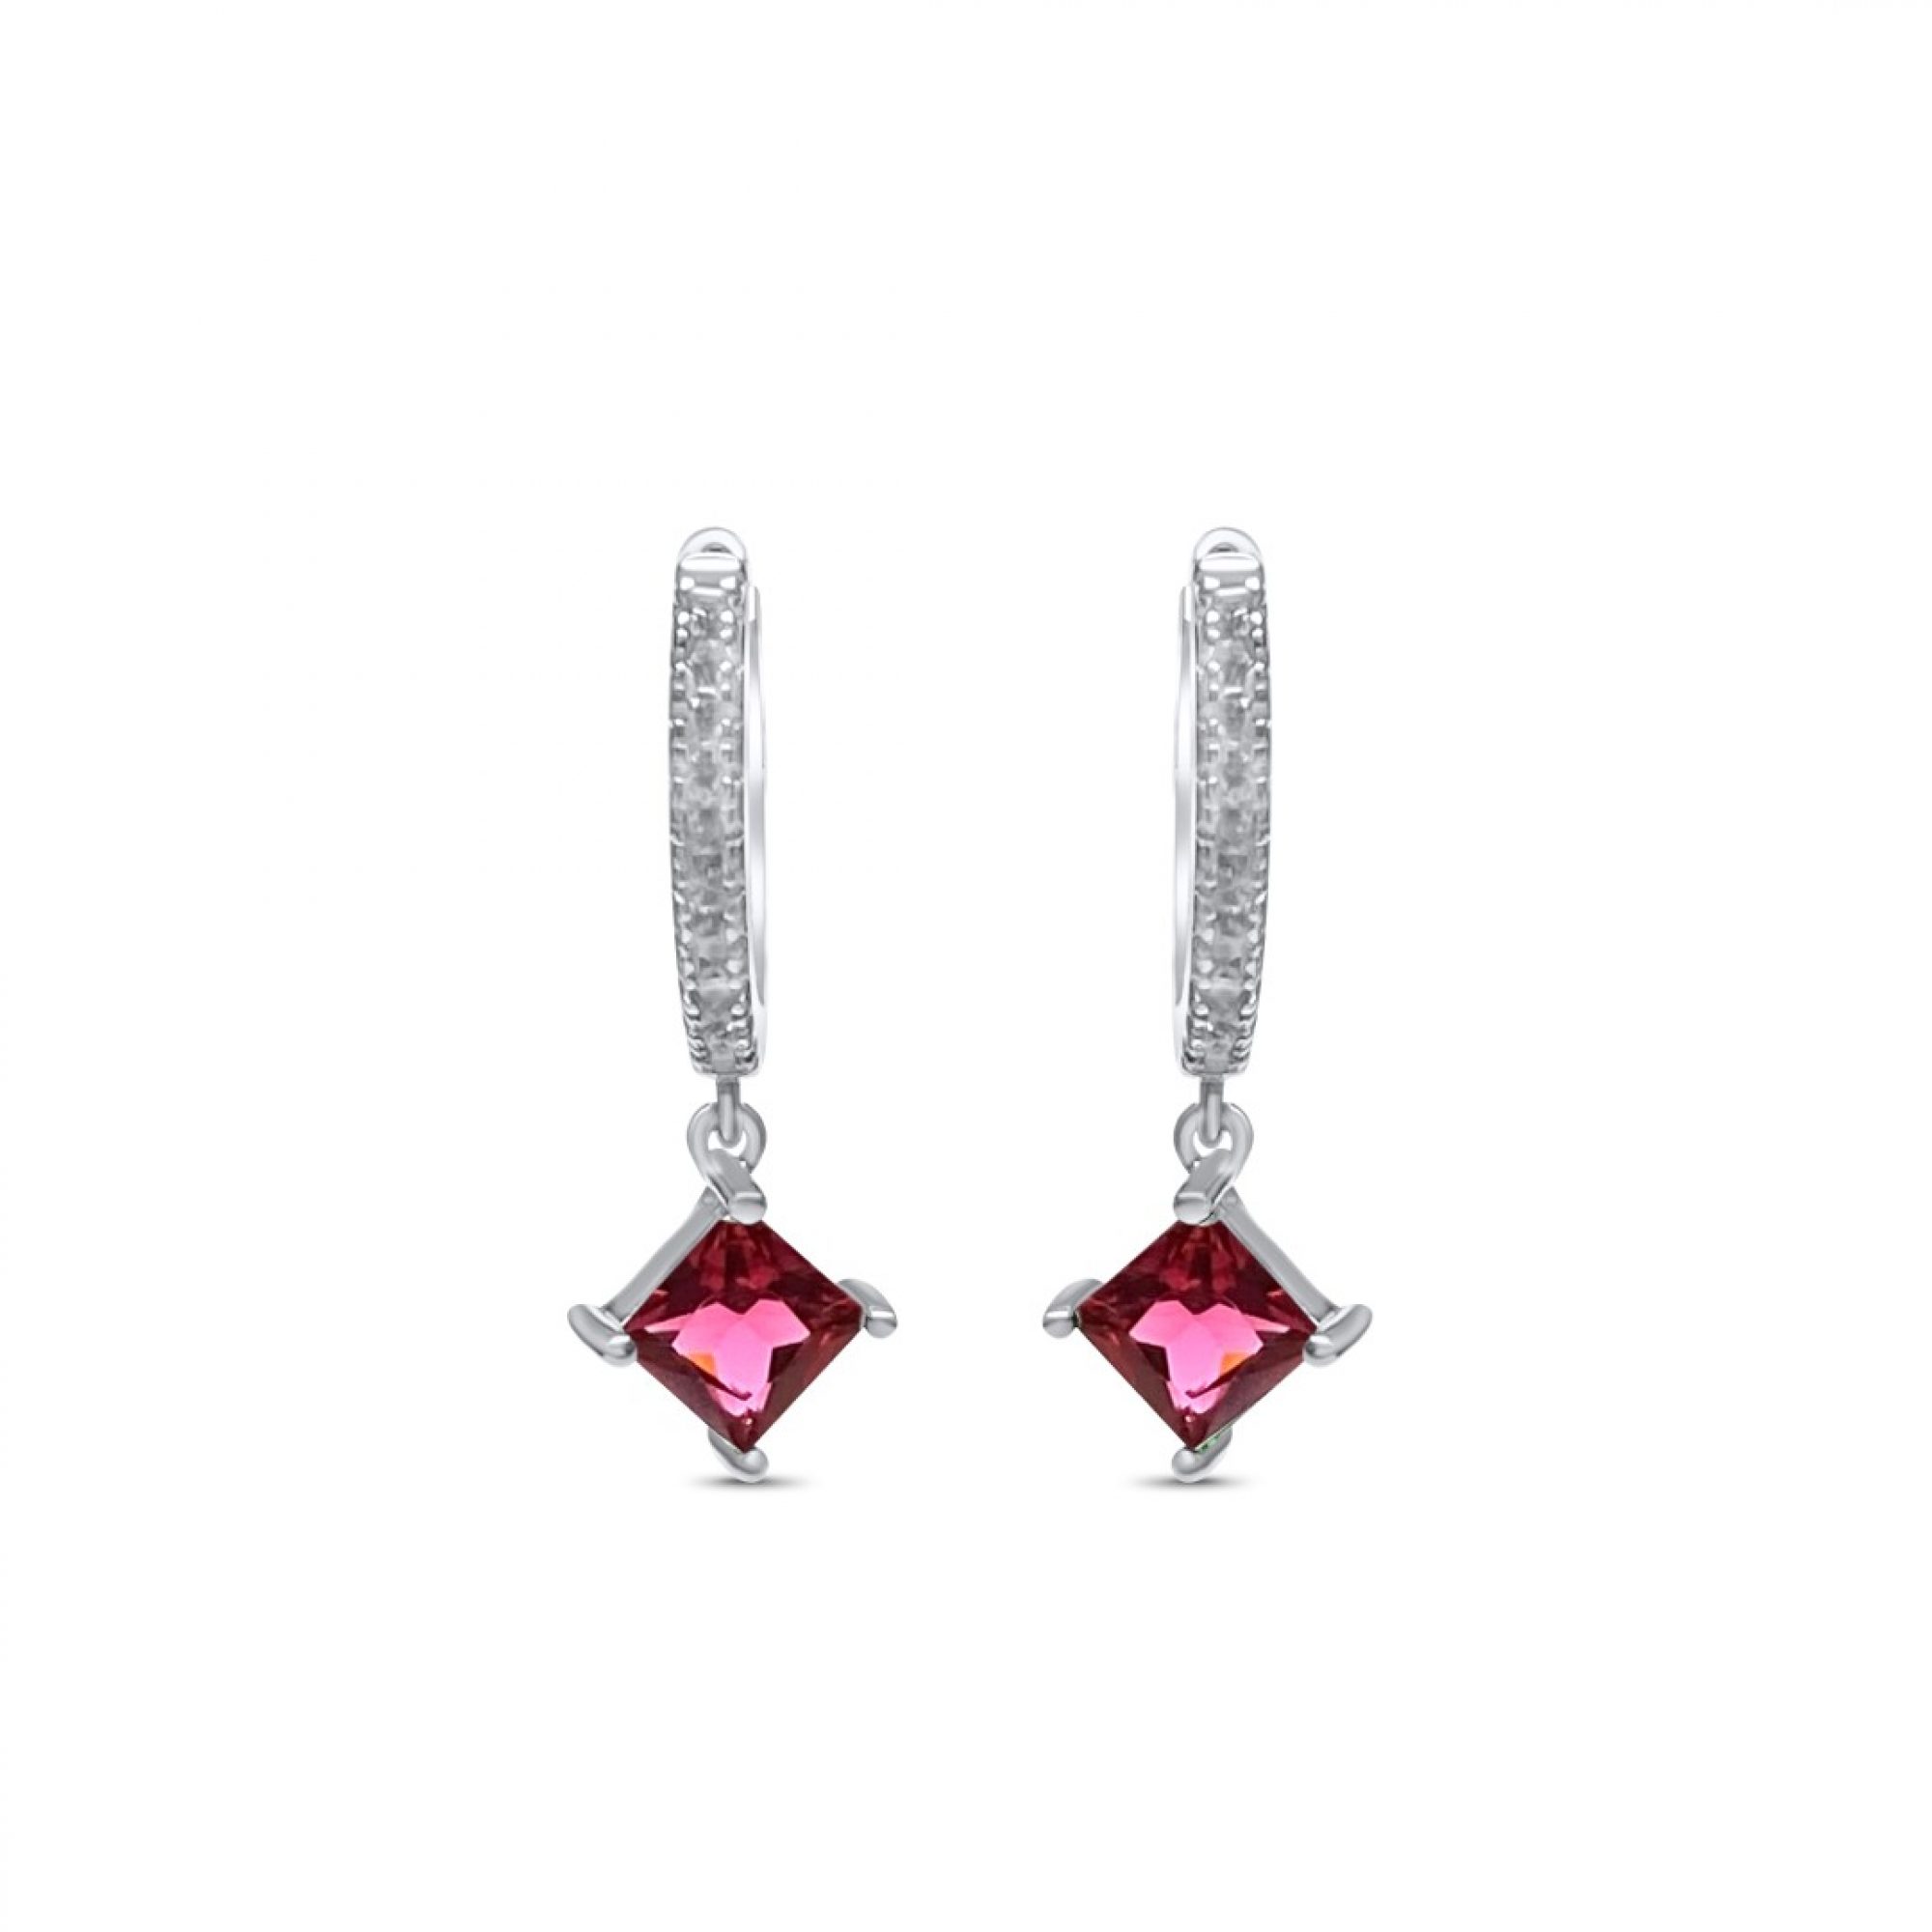 Silver earrings with ruby and zircon stones